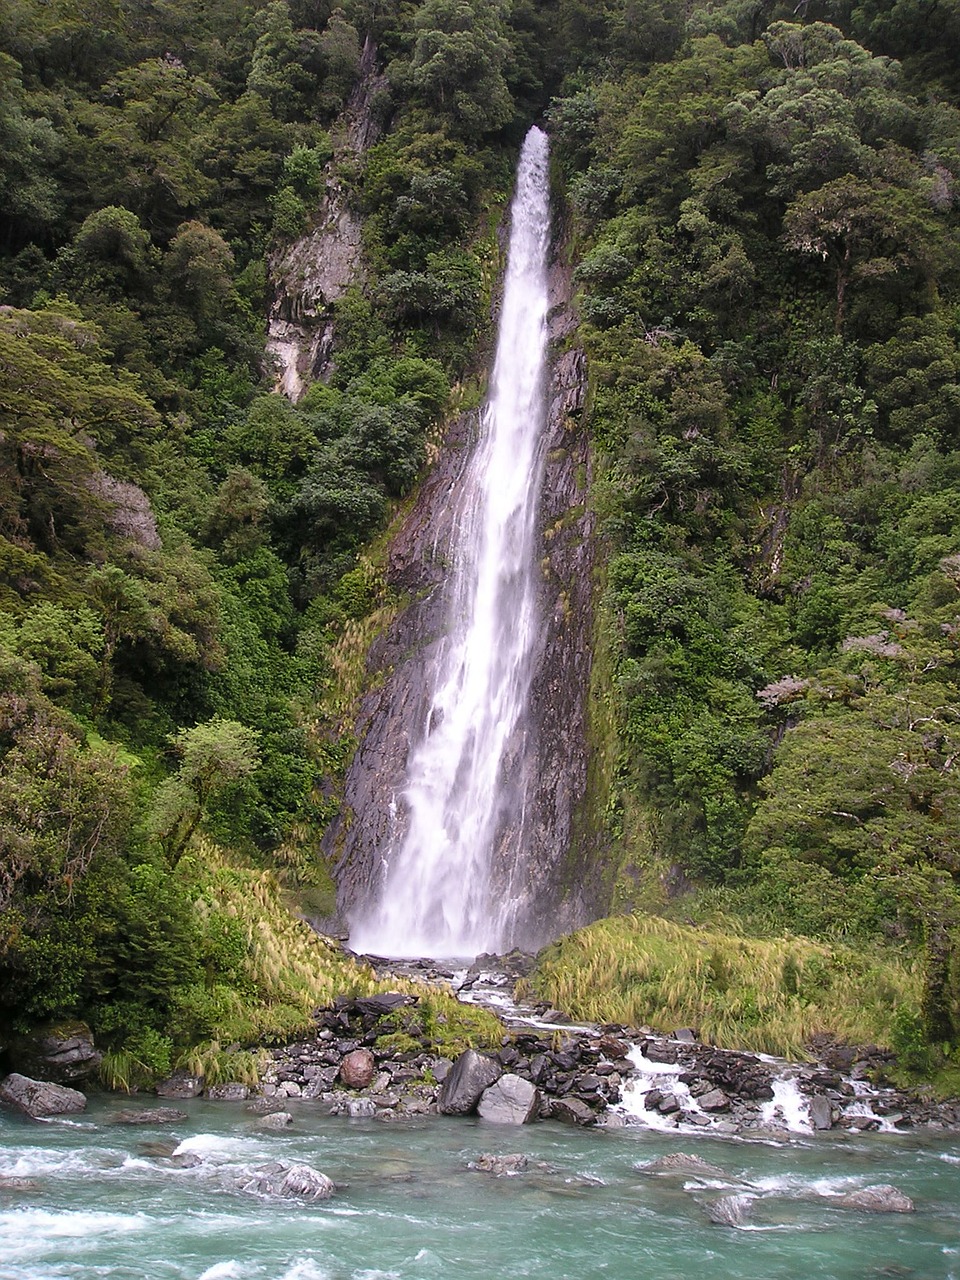 new zealand,waterfall,nature,landscape,free pictures, free photos, free images, royalty free, free illustrations, public domain